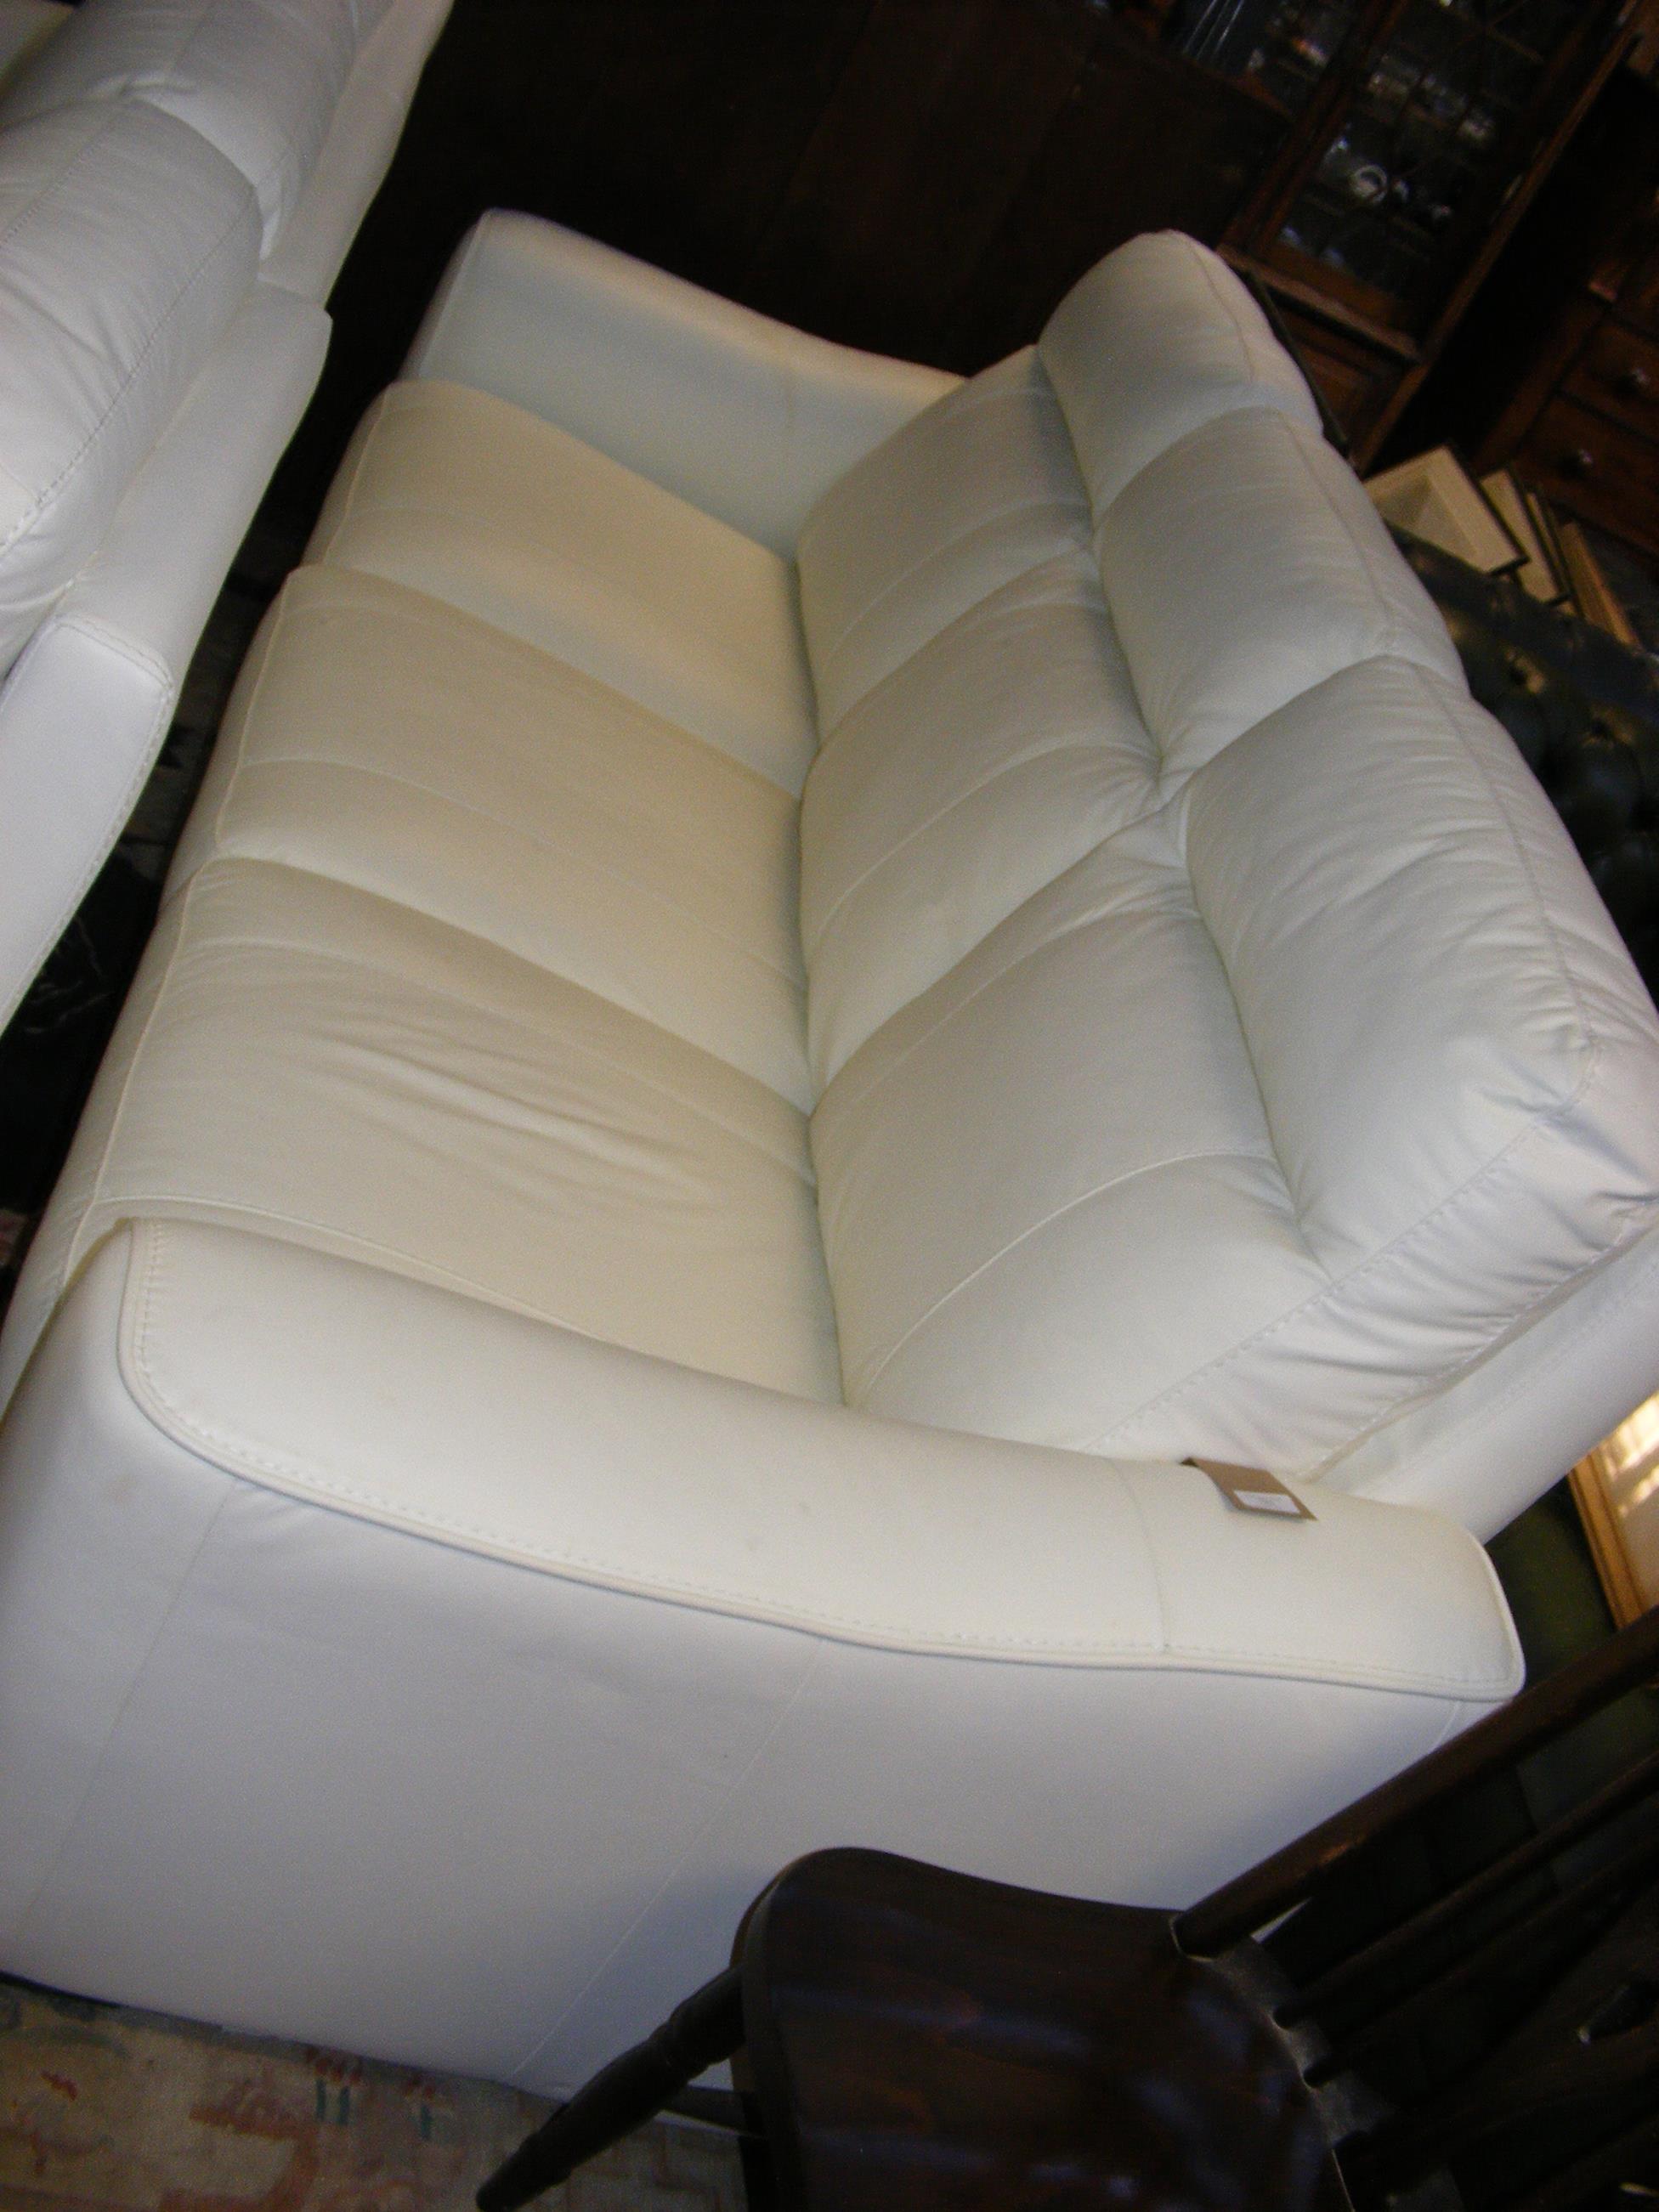 The matching three seater settee